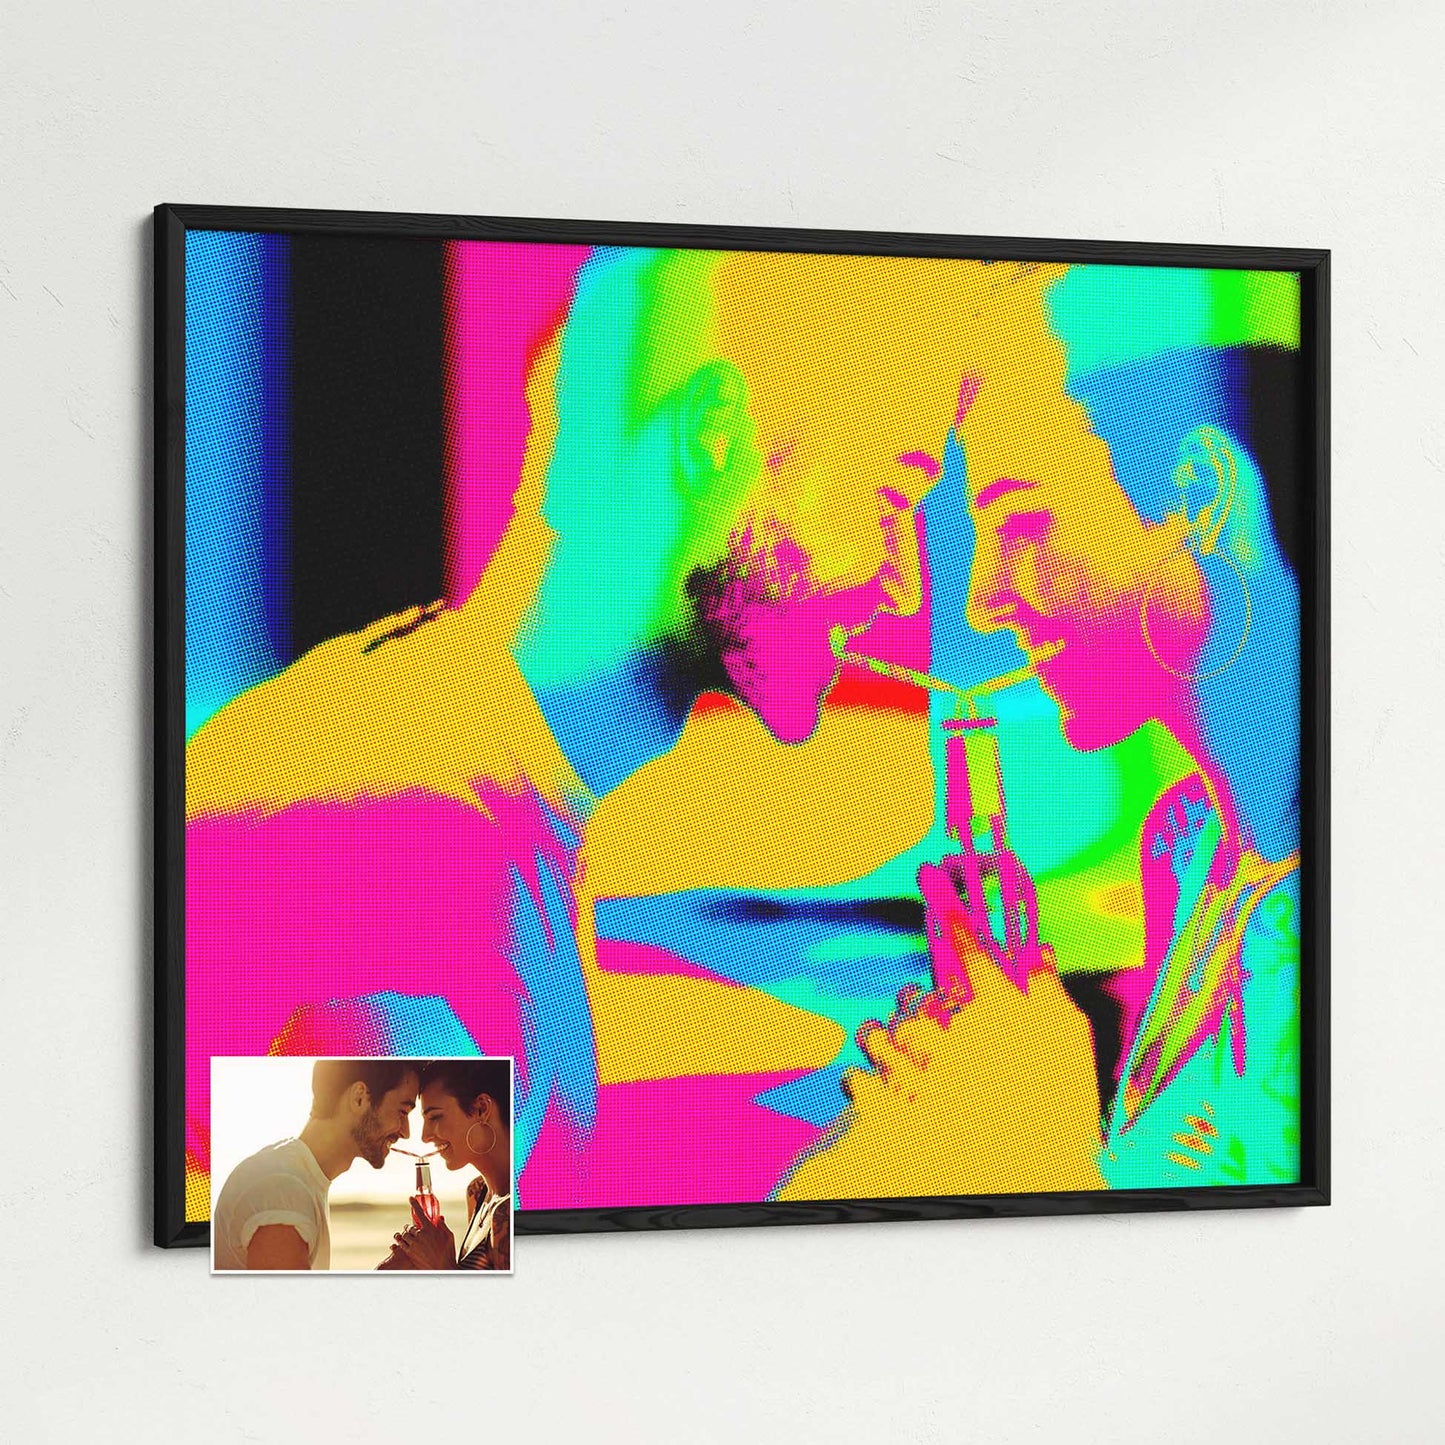 Experience a burst of creativity with our Personalised Pop Art Framed Print. Created through printing from photo, it features a vibrant pop art style with a halftone effect. The bold colors of pink, orange, green, and blue